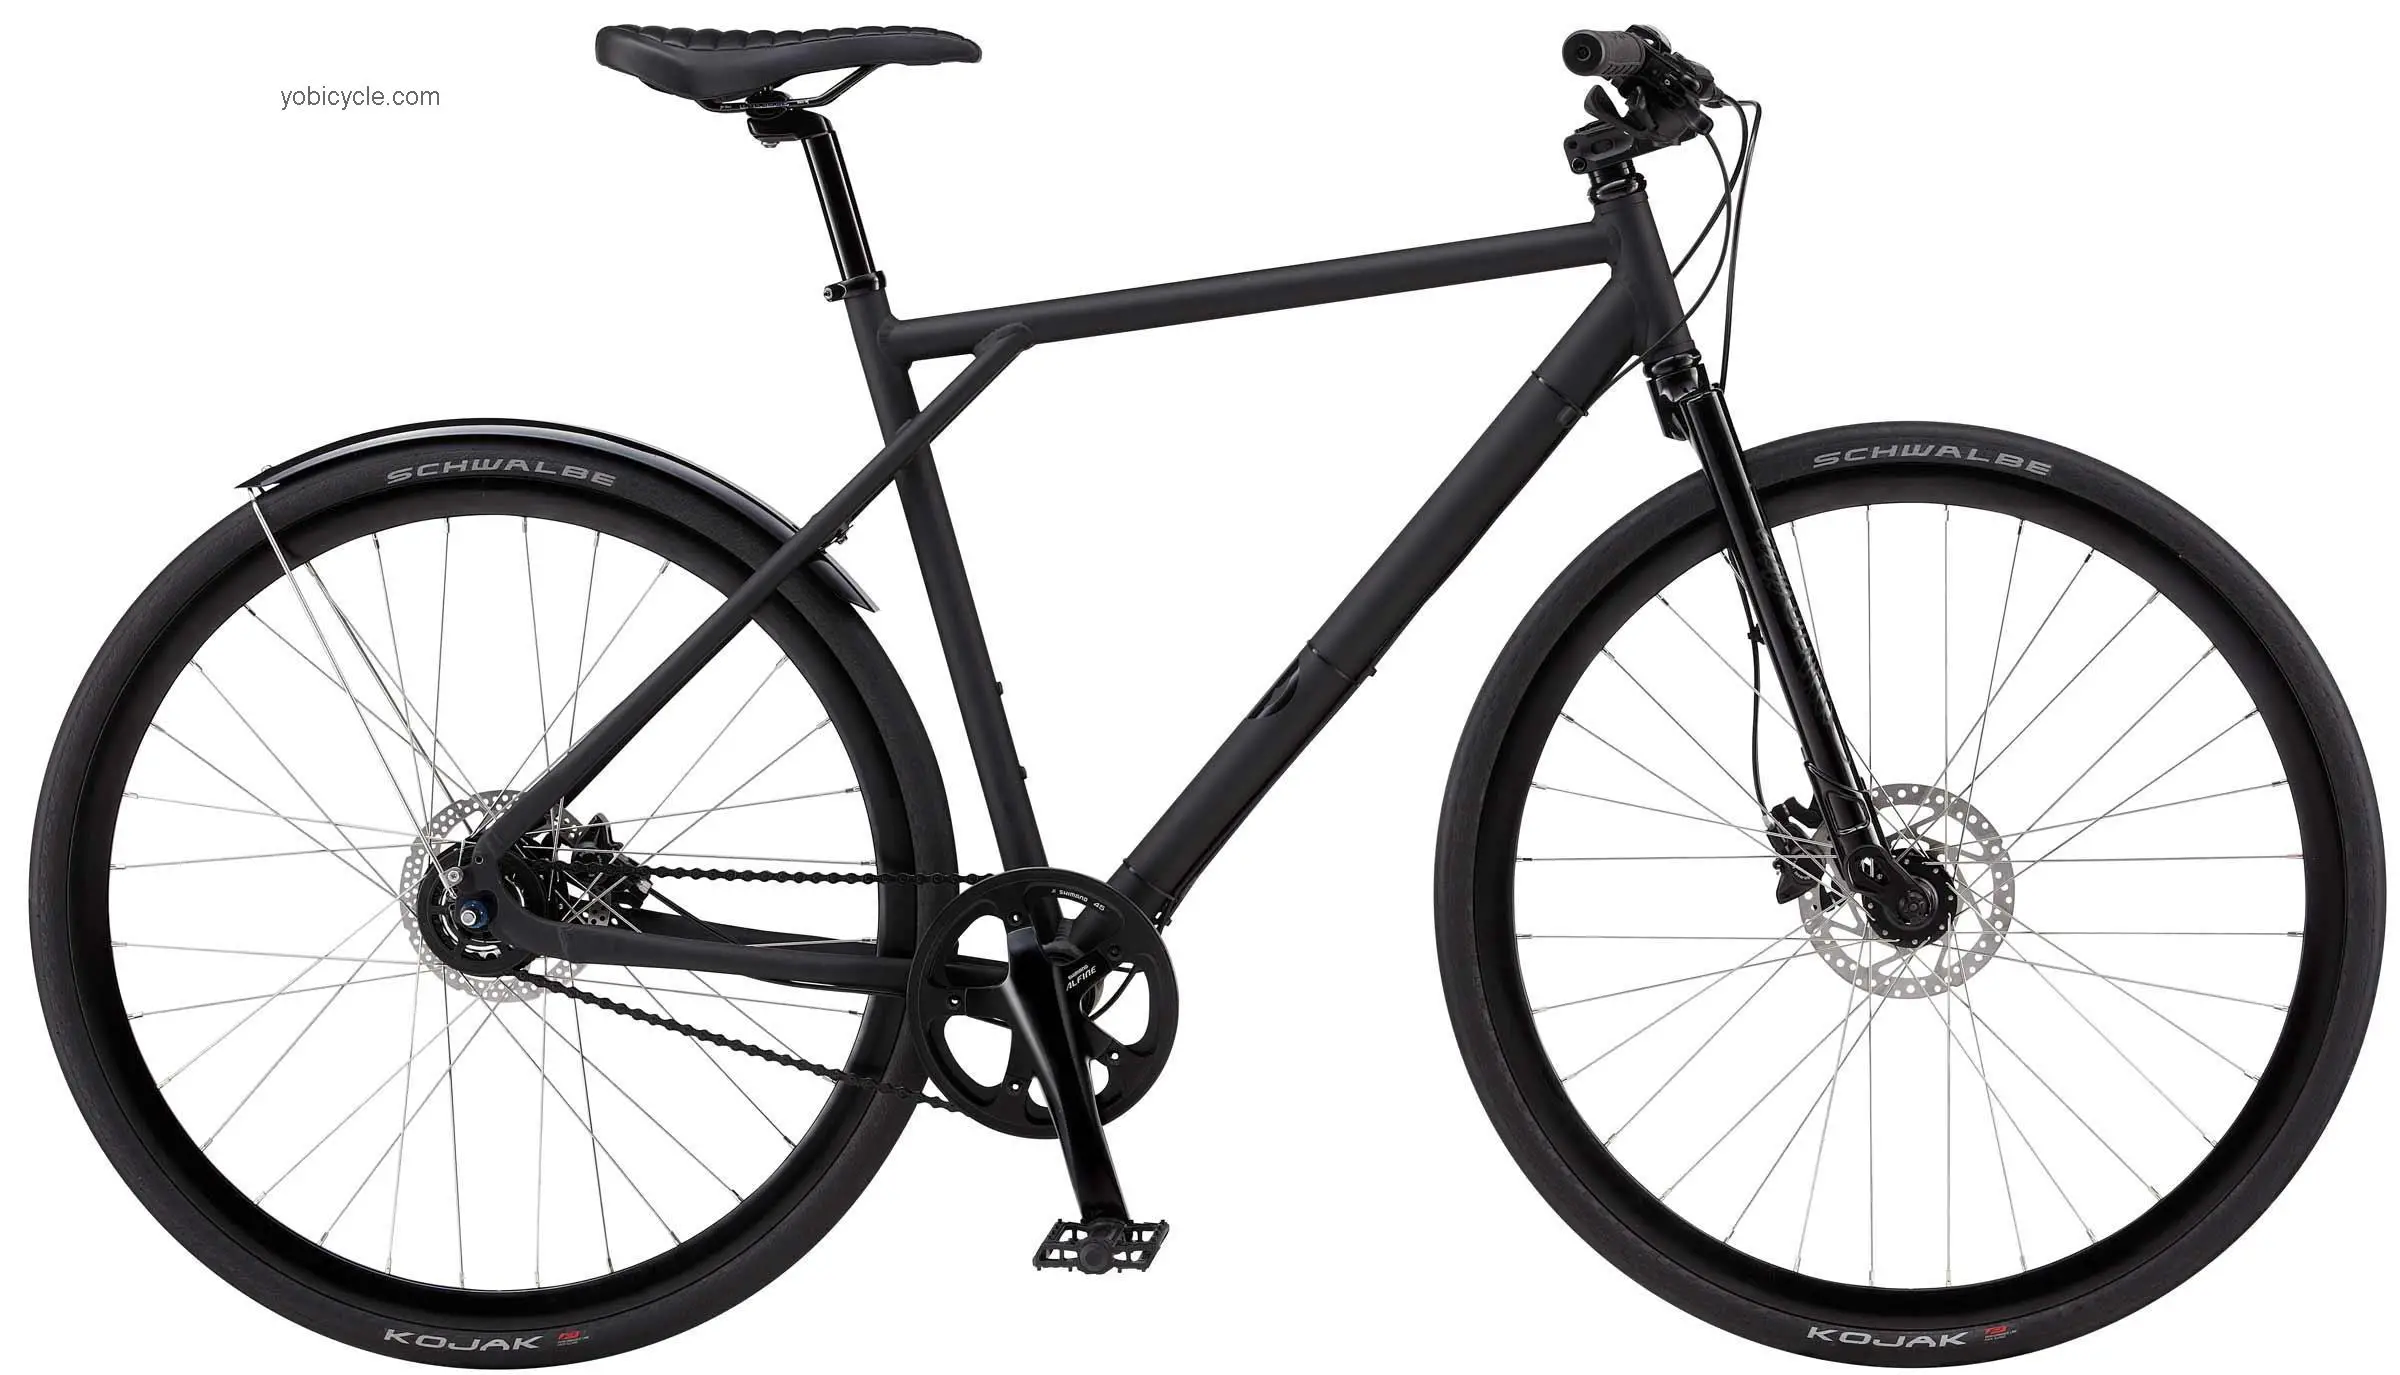 GT Bicycles Eightball 2013 comparison online with competitors